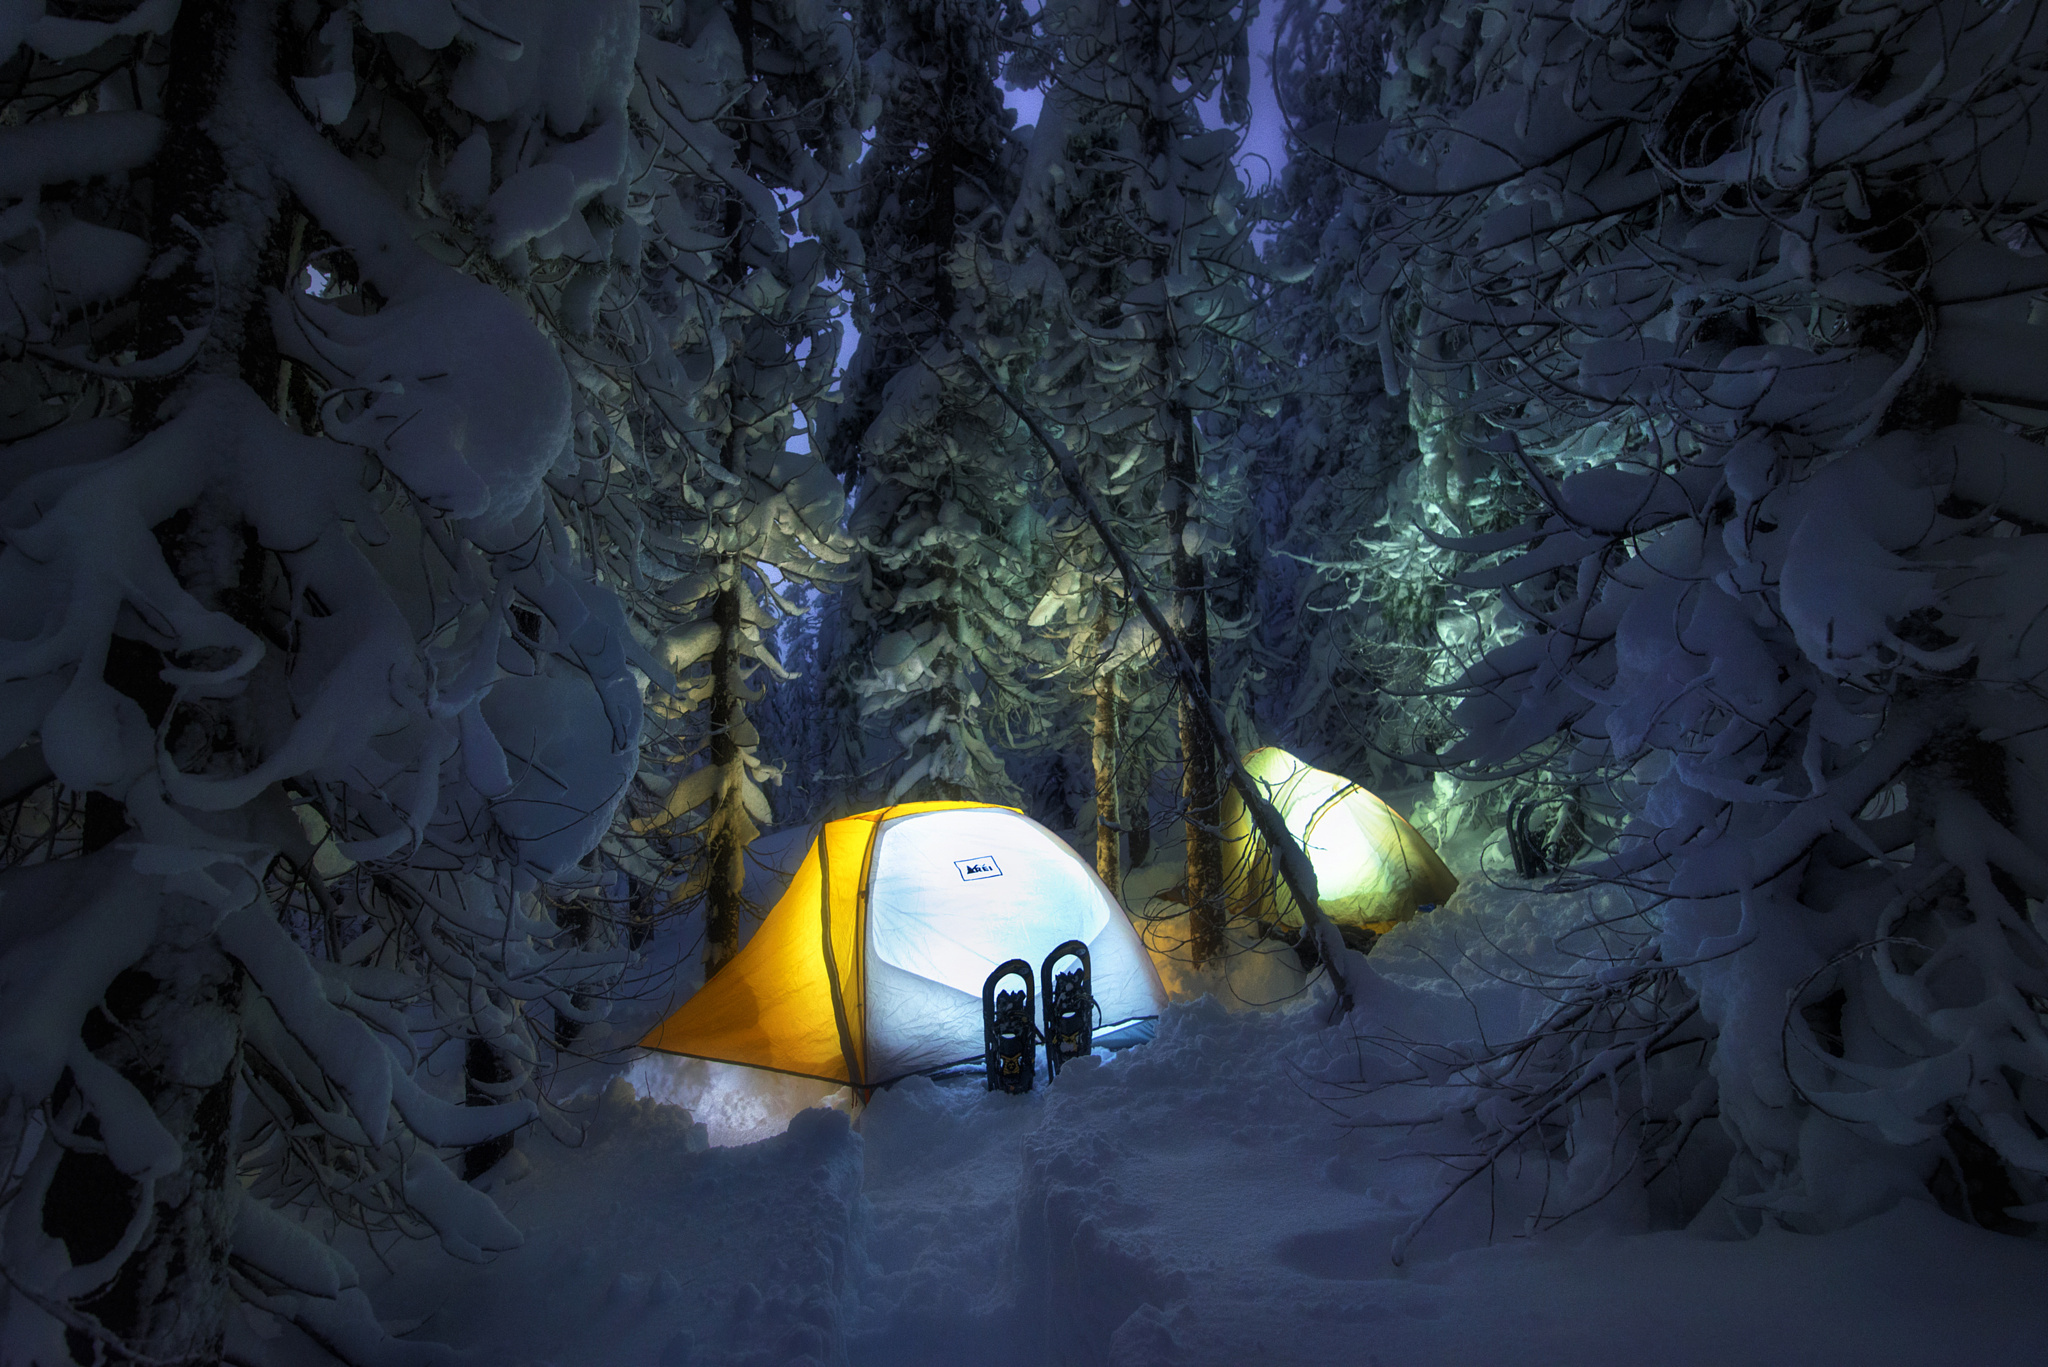 camping, tent, photography, evening, forest, nature, snow